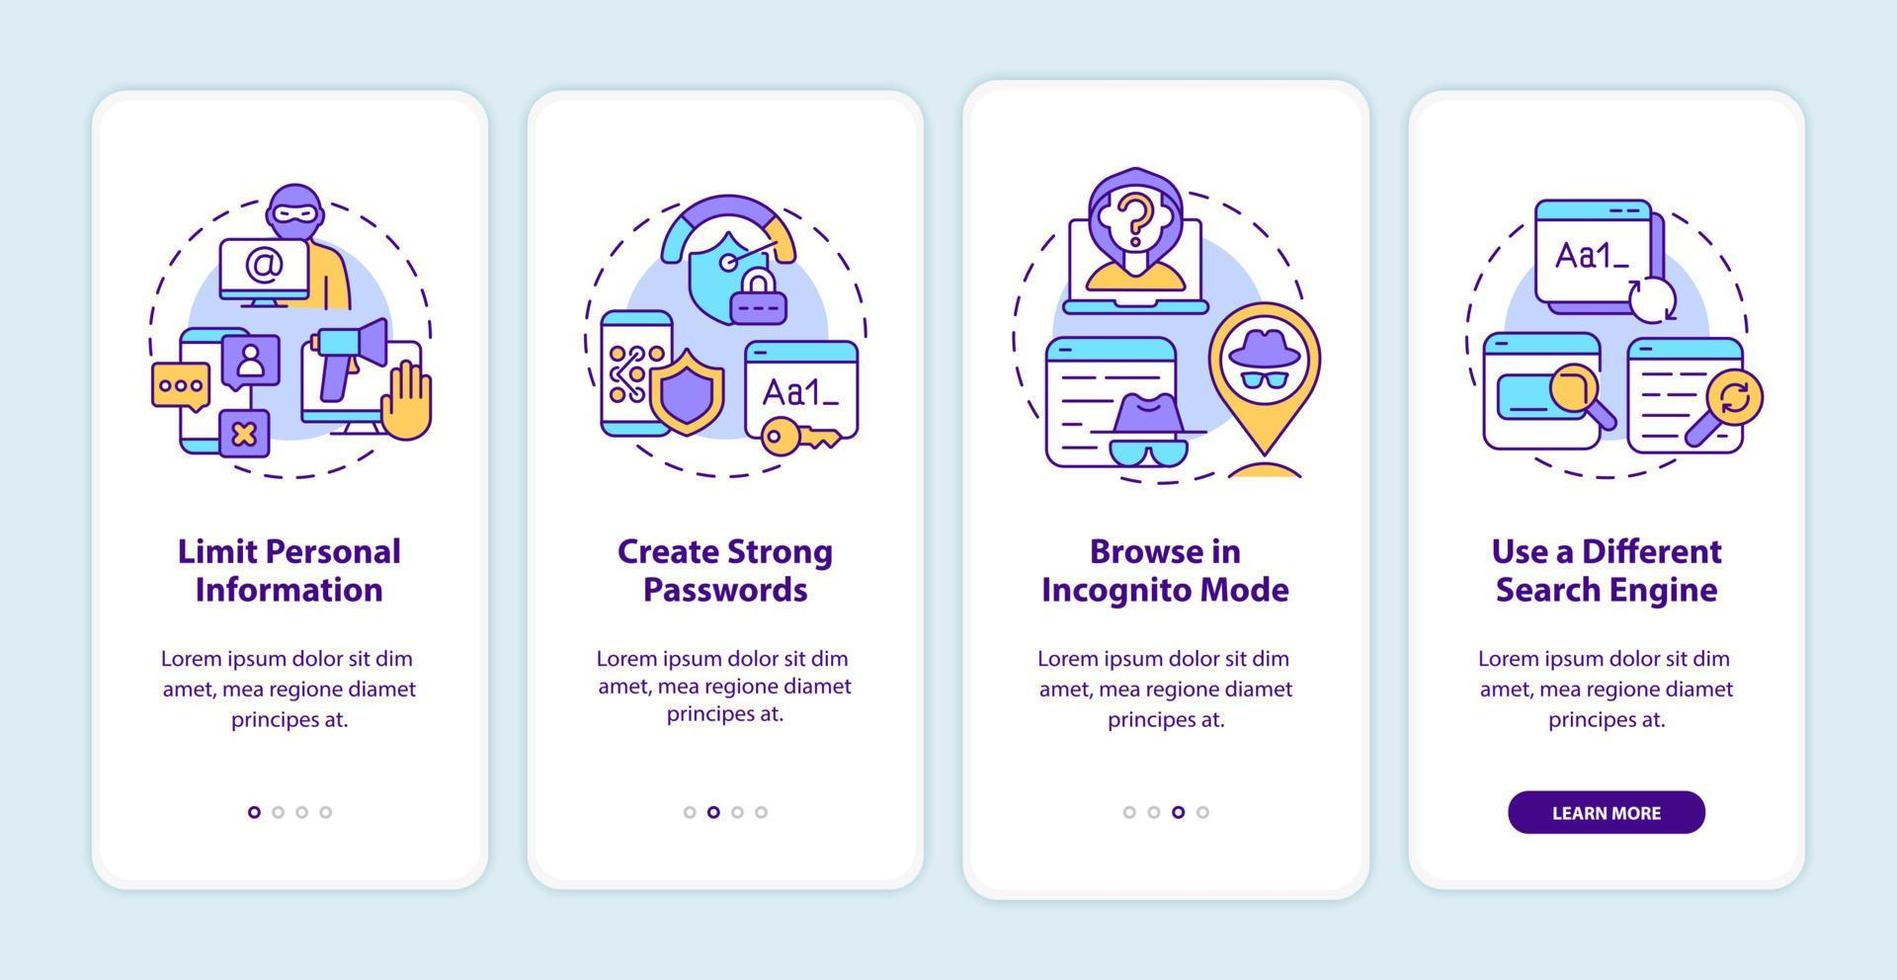 Internet search safety tips onboarding mobile app page screen. Data protection walkthrough eight four graphic instructions with concepts. UI, UX, GUI vector template with linear color illustrations